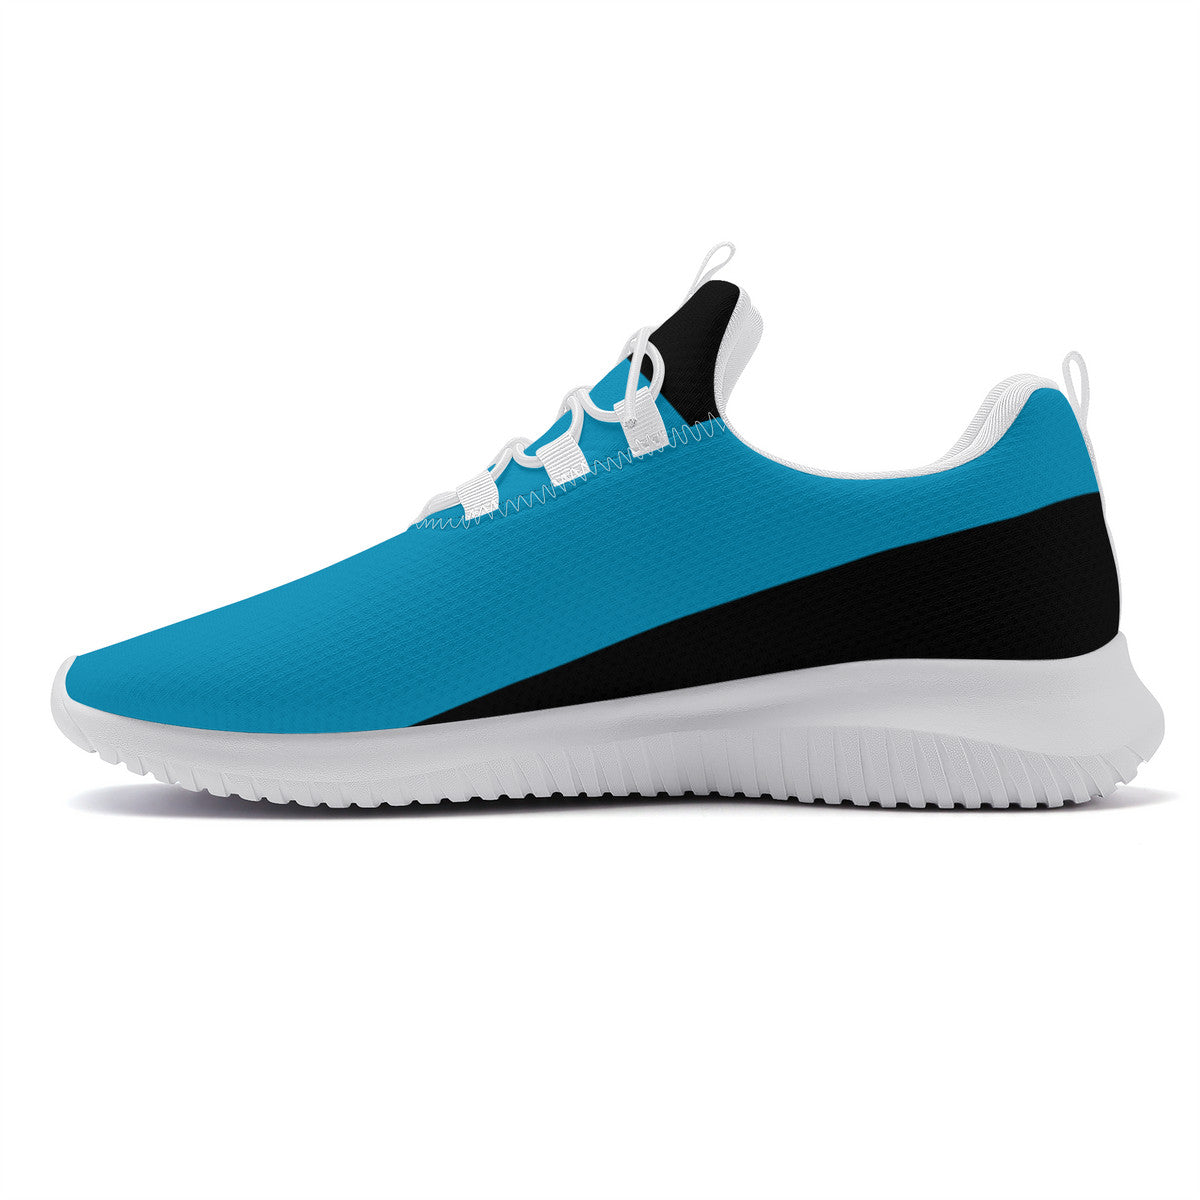 Fitness Sneakers - Move - Blue